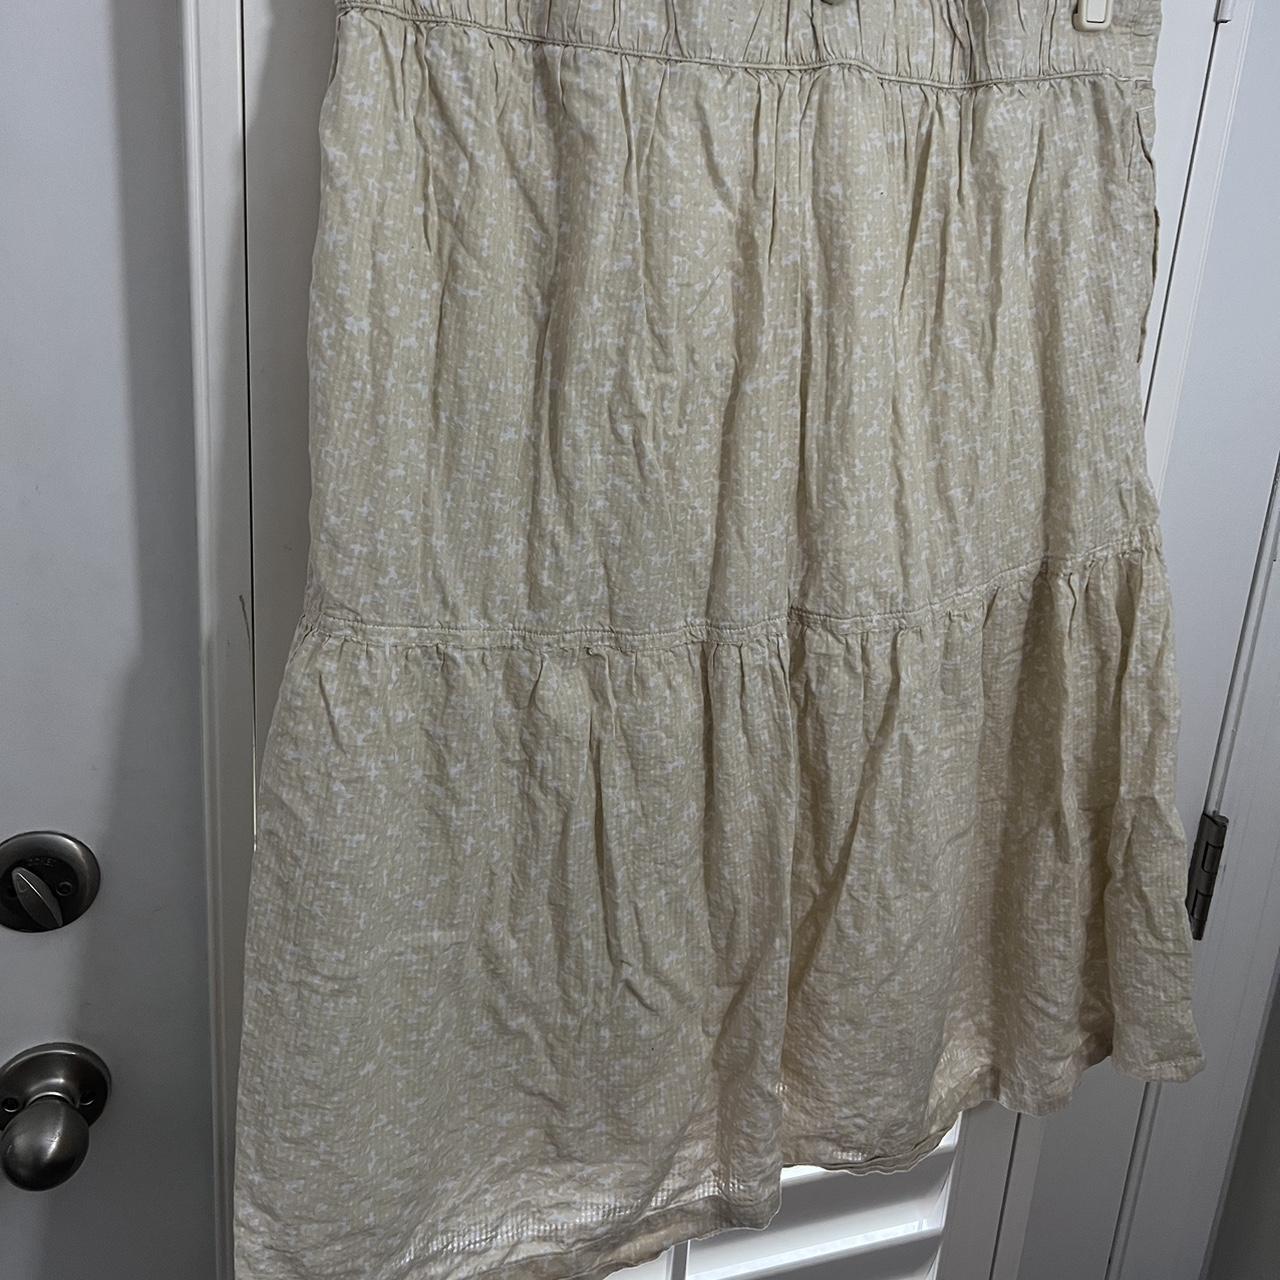 Free Assembly Women's Cream and White Skirt (2)